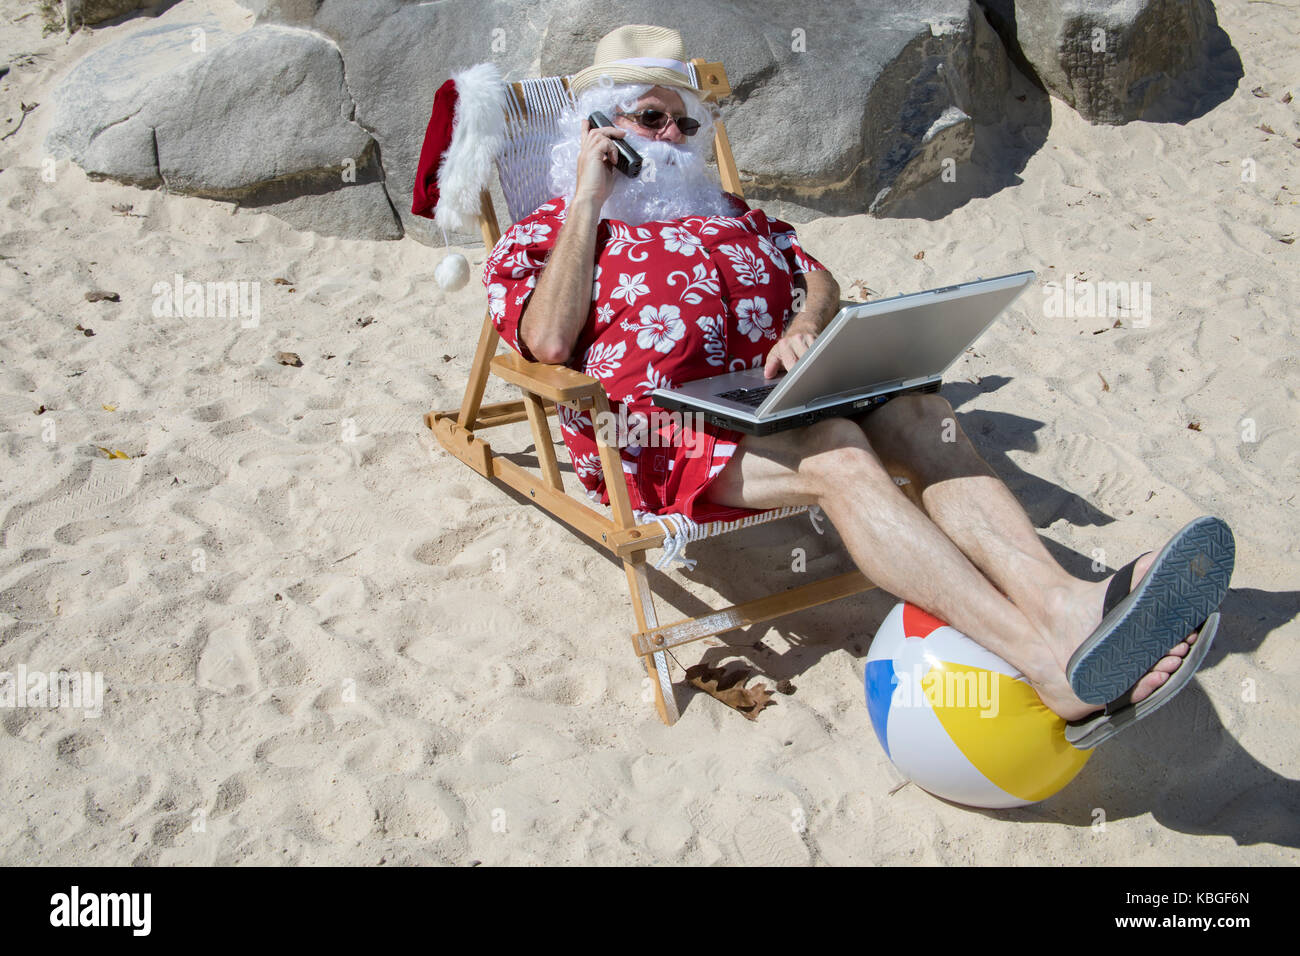 Santa Claus in red swimming trunks ans Hawaiian shirt lounging on sandy ...